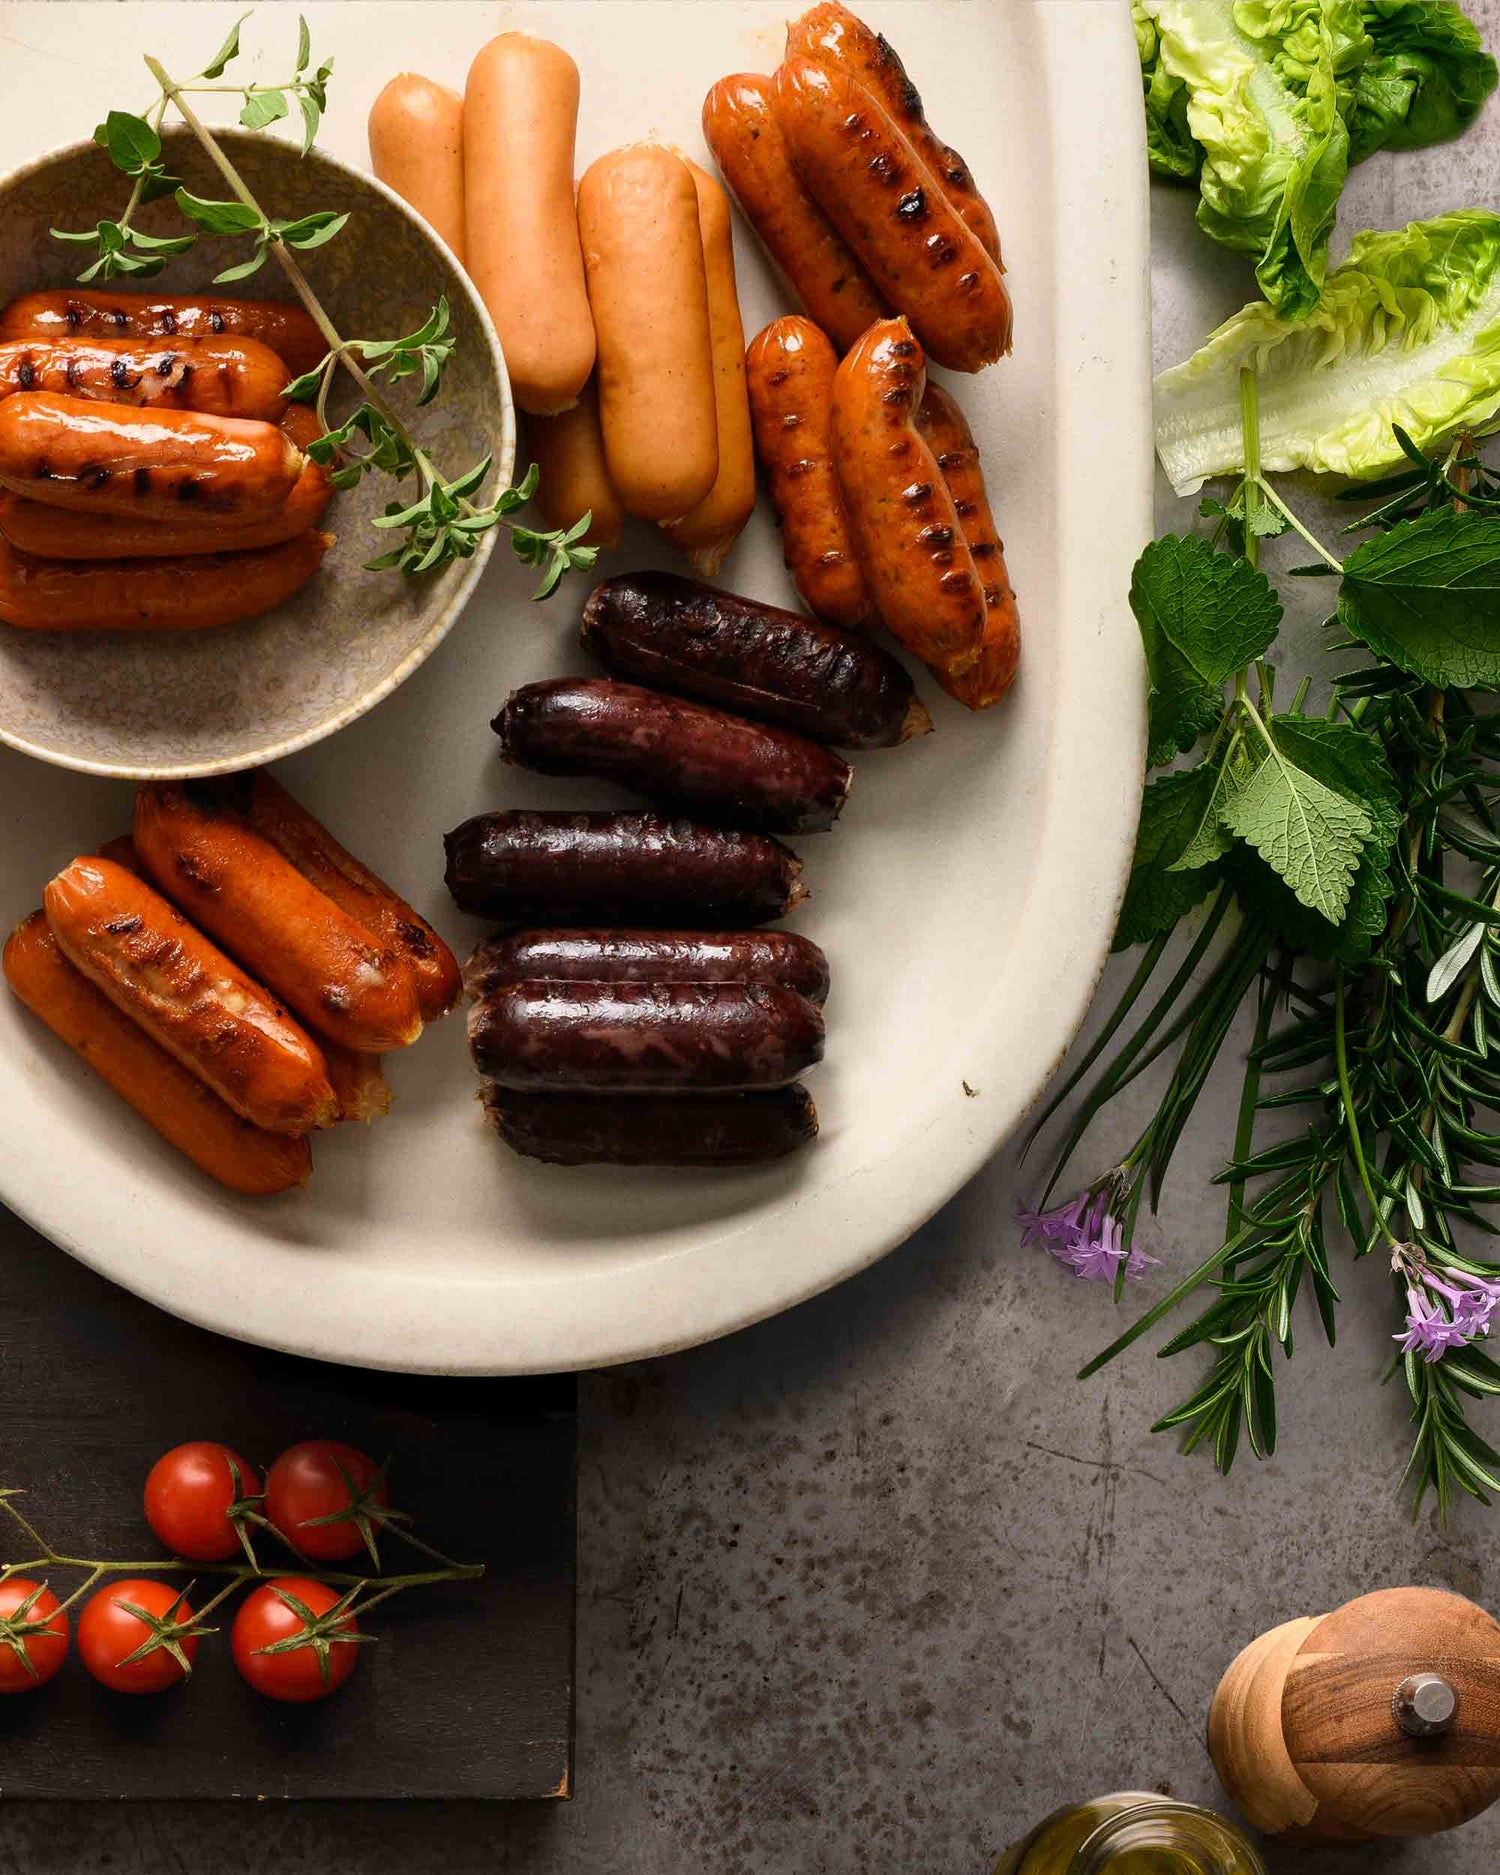 Gotzinger Smallgoods Chipolata Sausages with Healthy Salad Ingredients